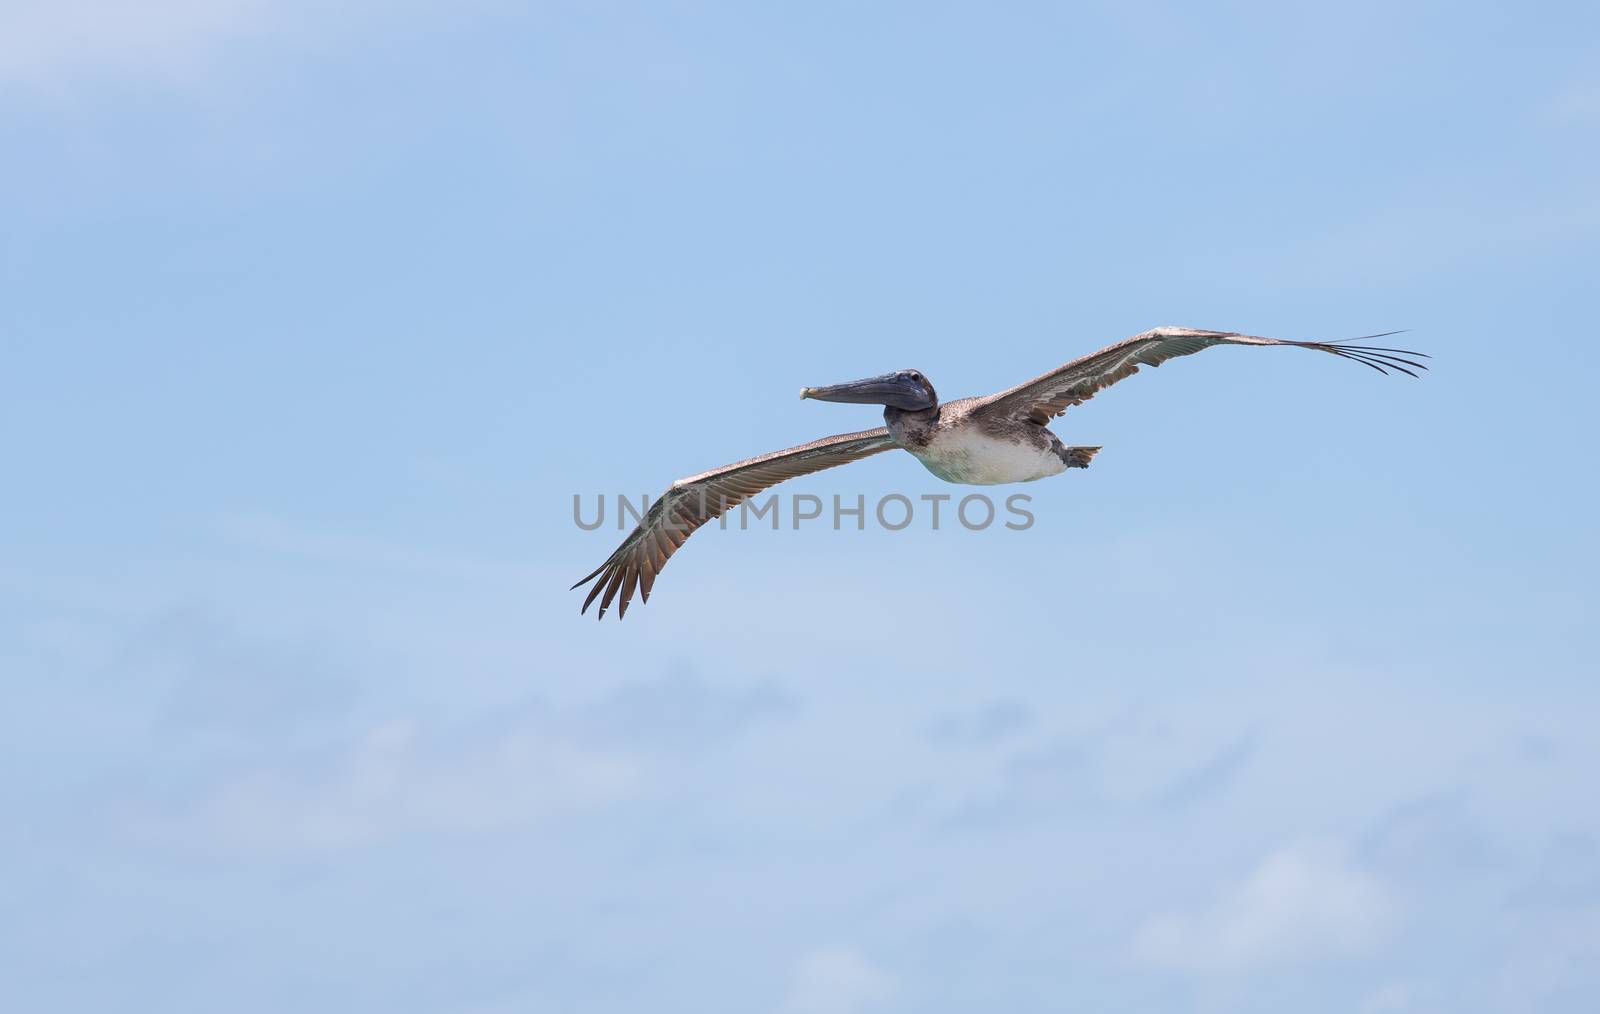 Brown Pelicans are abundant in the Keys. One can spend hours watching them dive-bomb into the water trying to catch a fish.